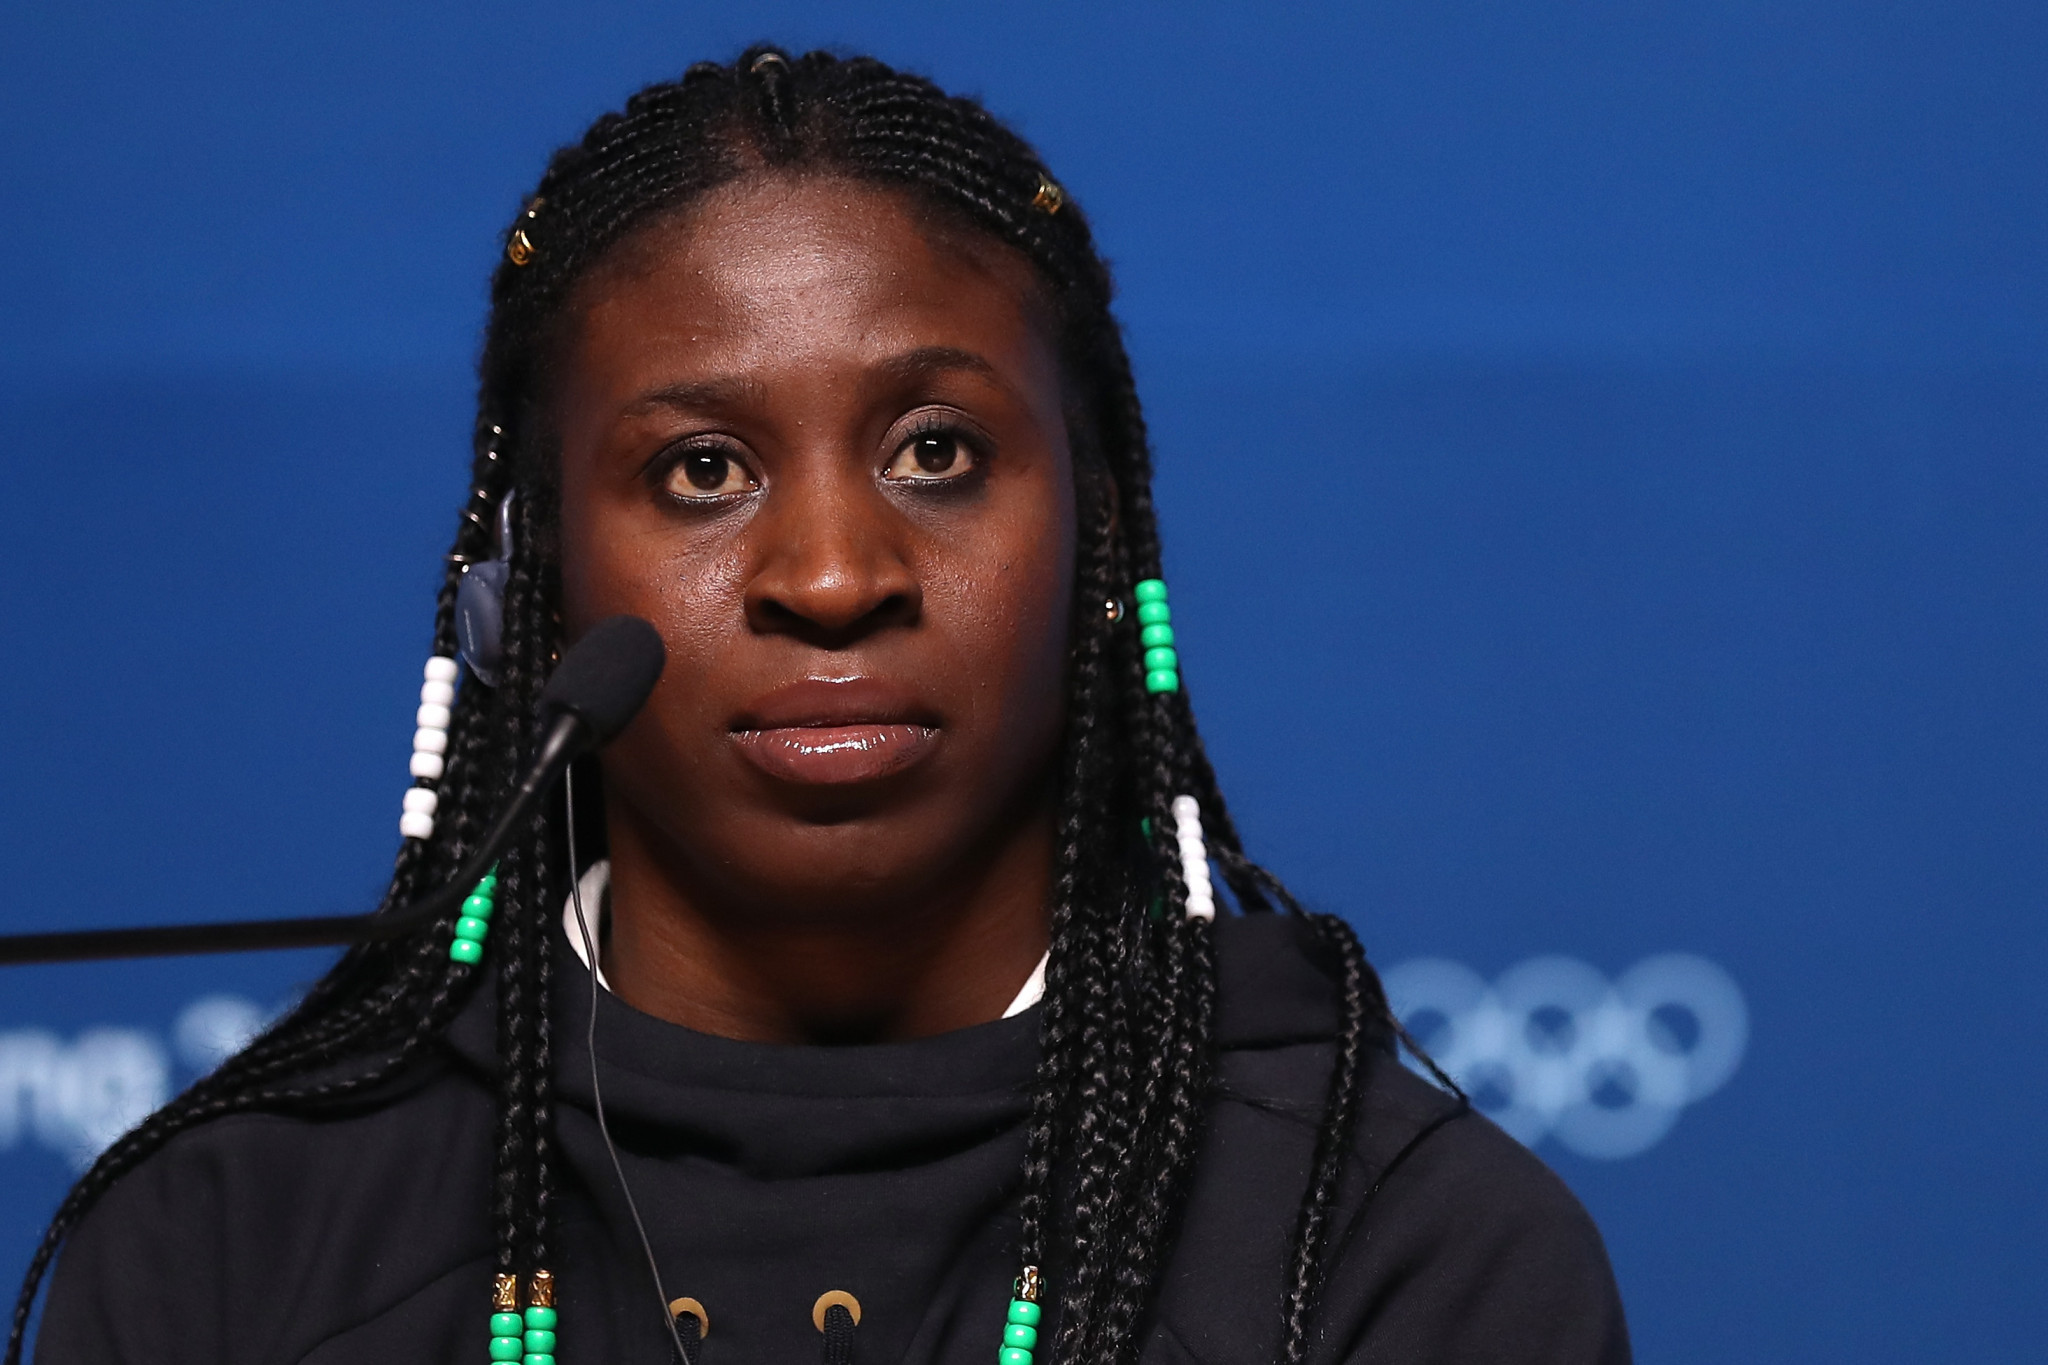 Adeagbo's victory came on the same day as the coaches of Ghanaian skeleton athlete Akwasi Frimpong made a last-ditch attempt to get the IOC restore continental spots in bobsleigh and skeleton for the Beijing 2022 Winter Olympics ©Getty Images